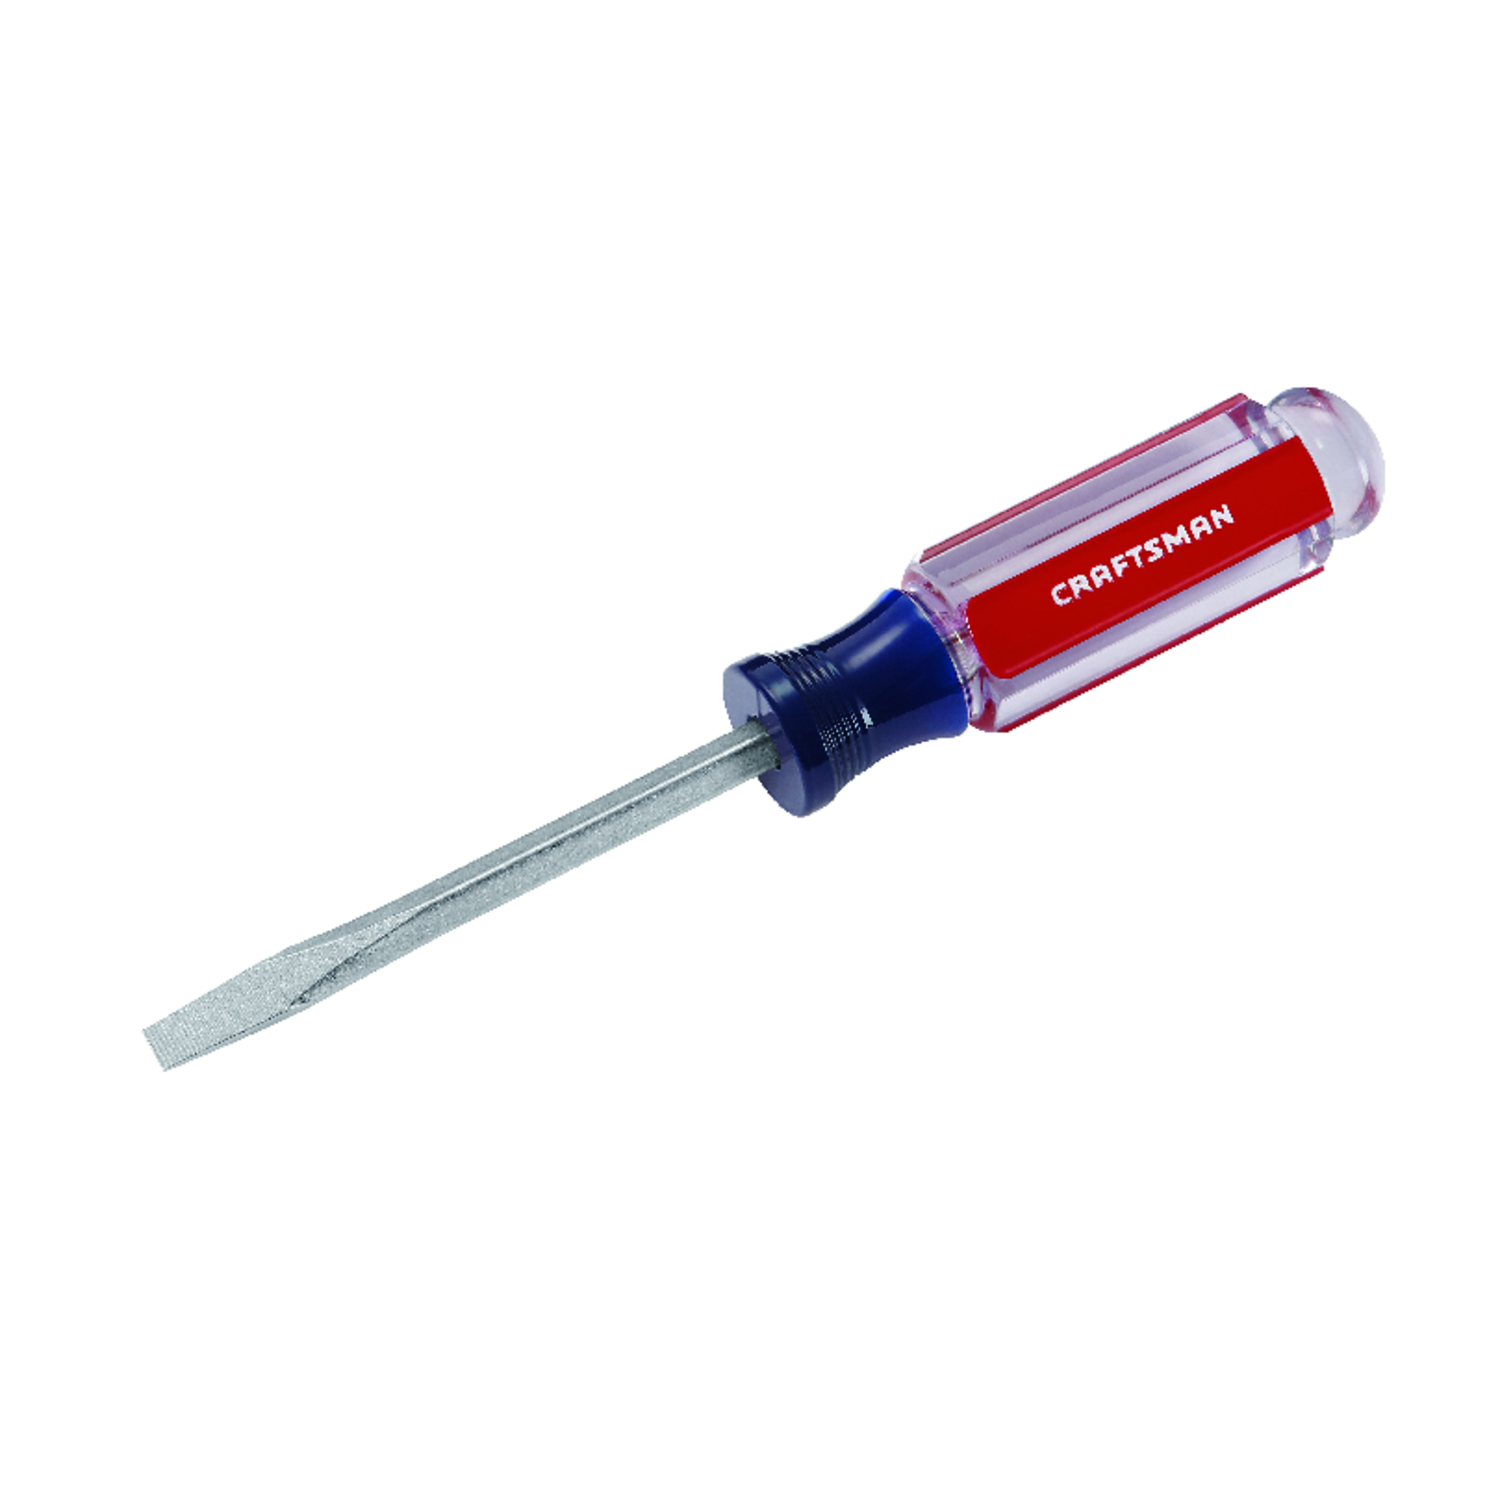 UPC 648738415835 product image for Craftsman 1/4in x 4in Slotted Screwdriver (00941583) | upcitemdb.com